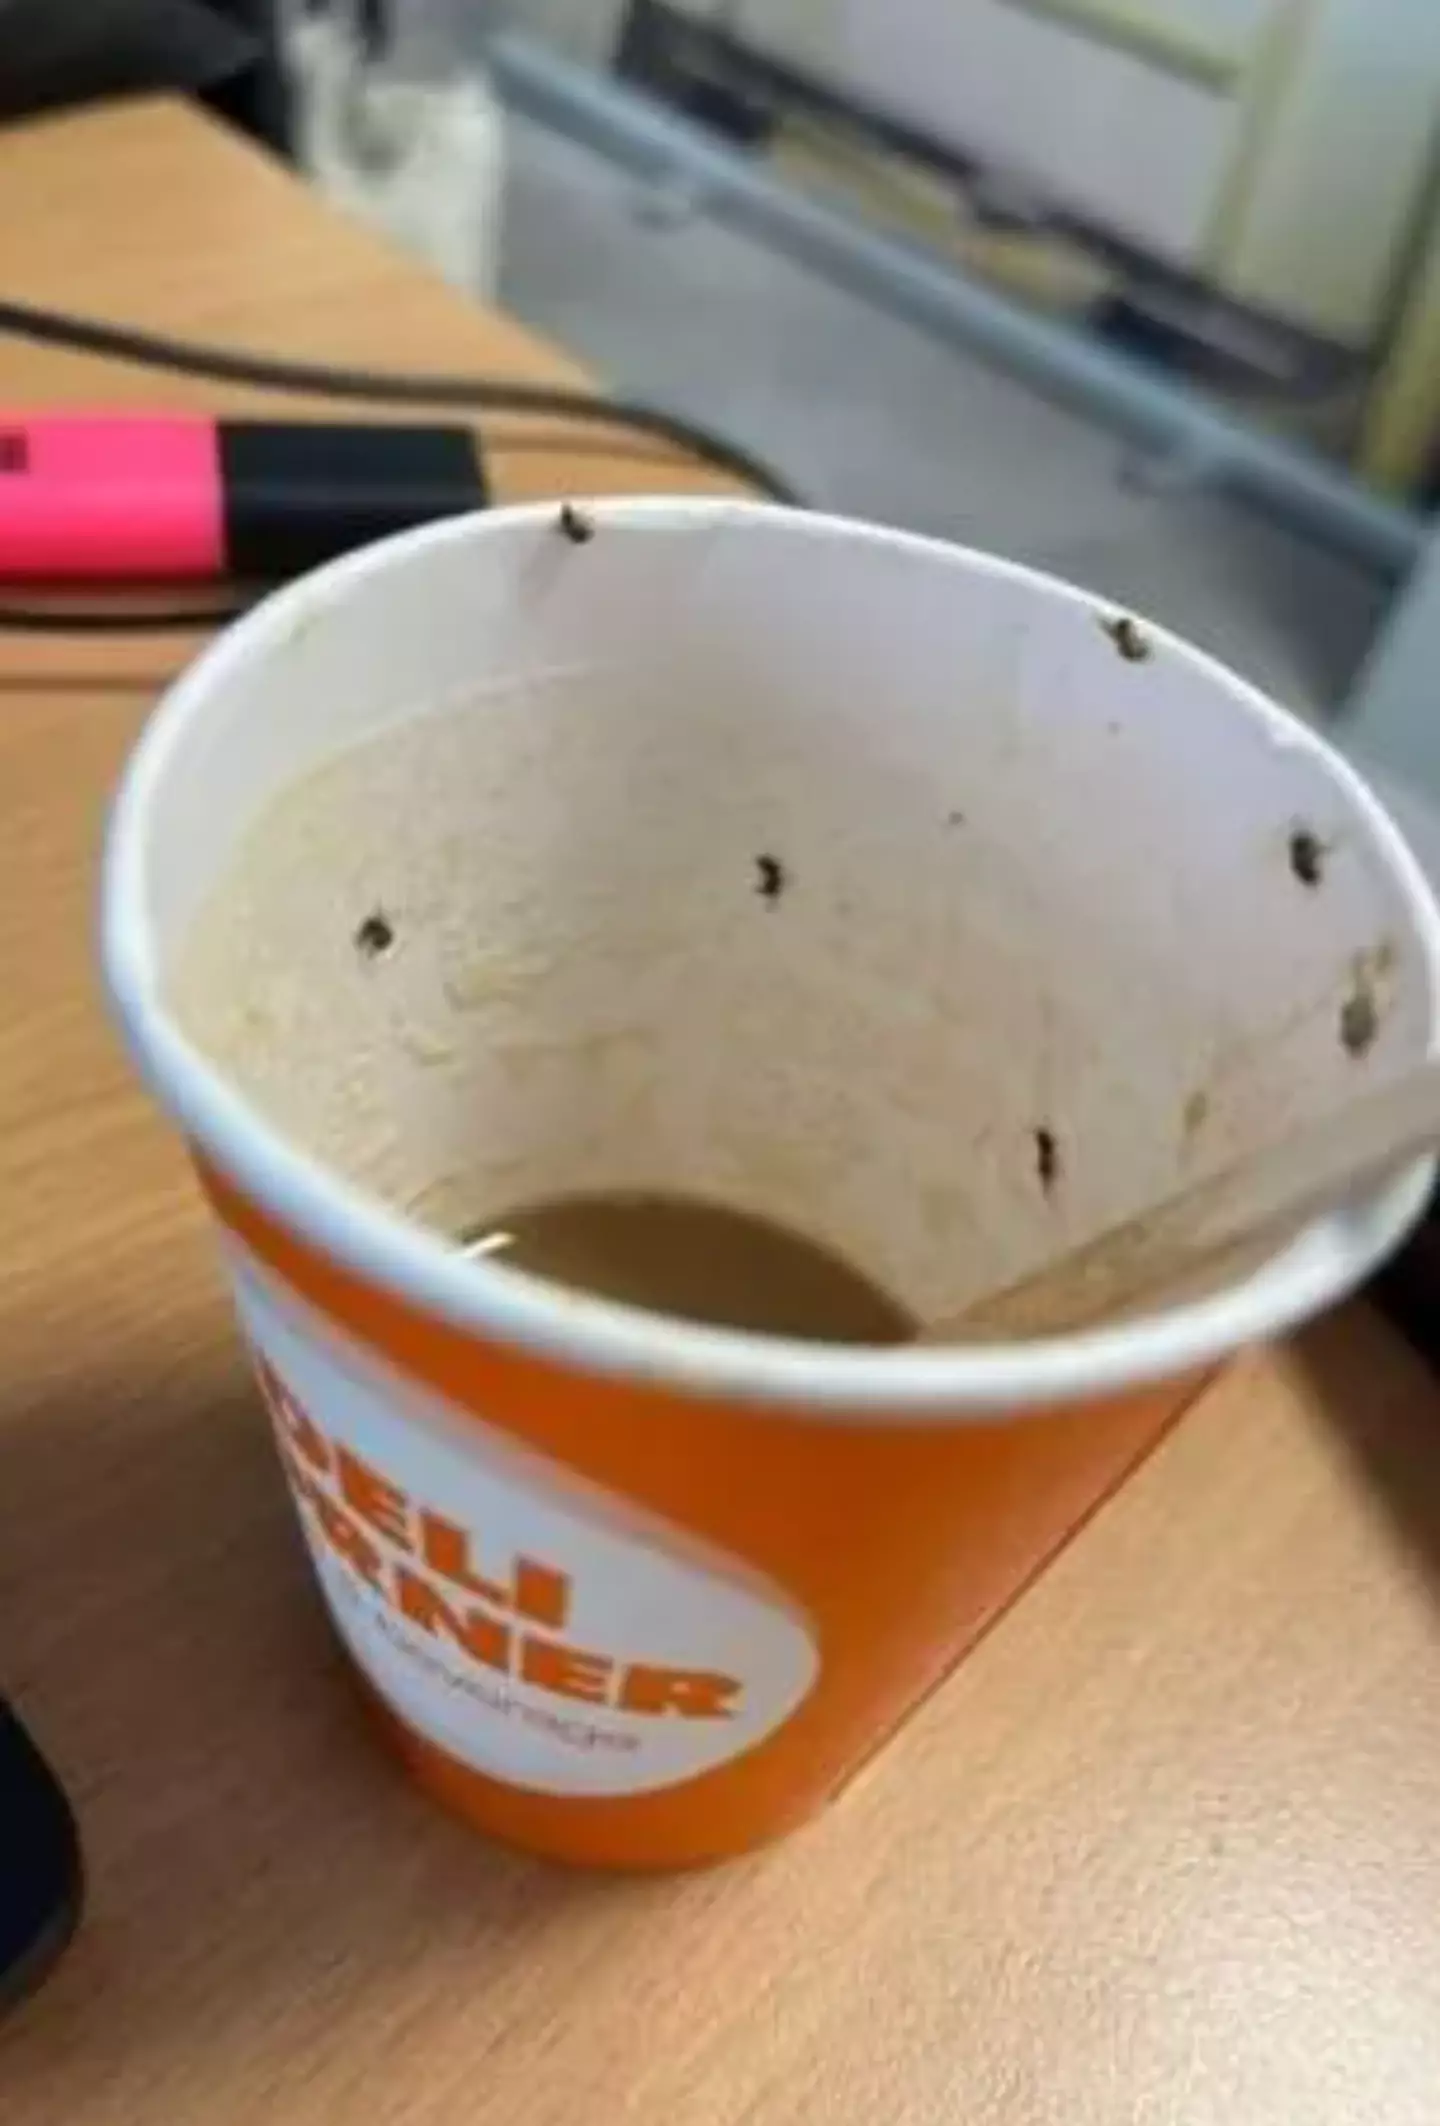 The cup was filled with bugs. (Ultima Hora)